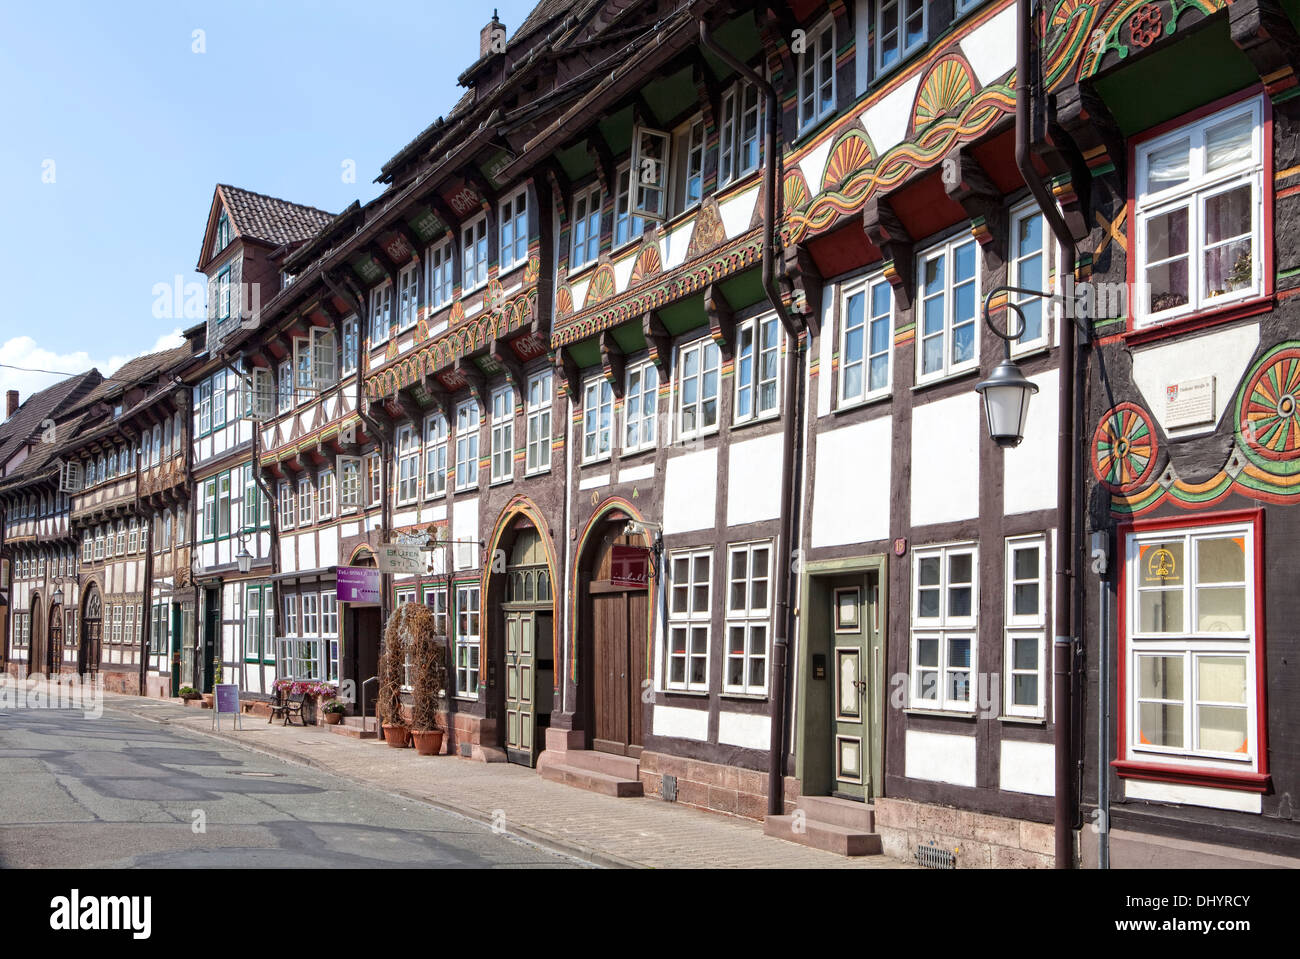 Half-timbered houses in the market square, Einbeck, Lower Saxony, Germany, Europe, Stock Photo